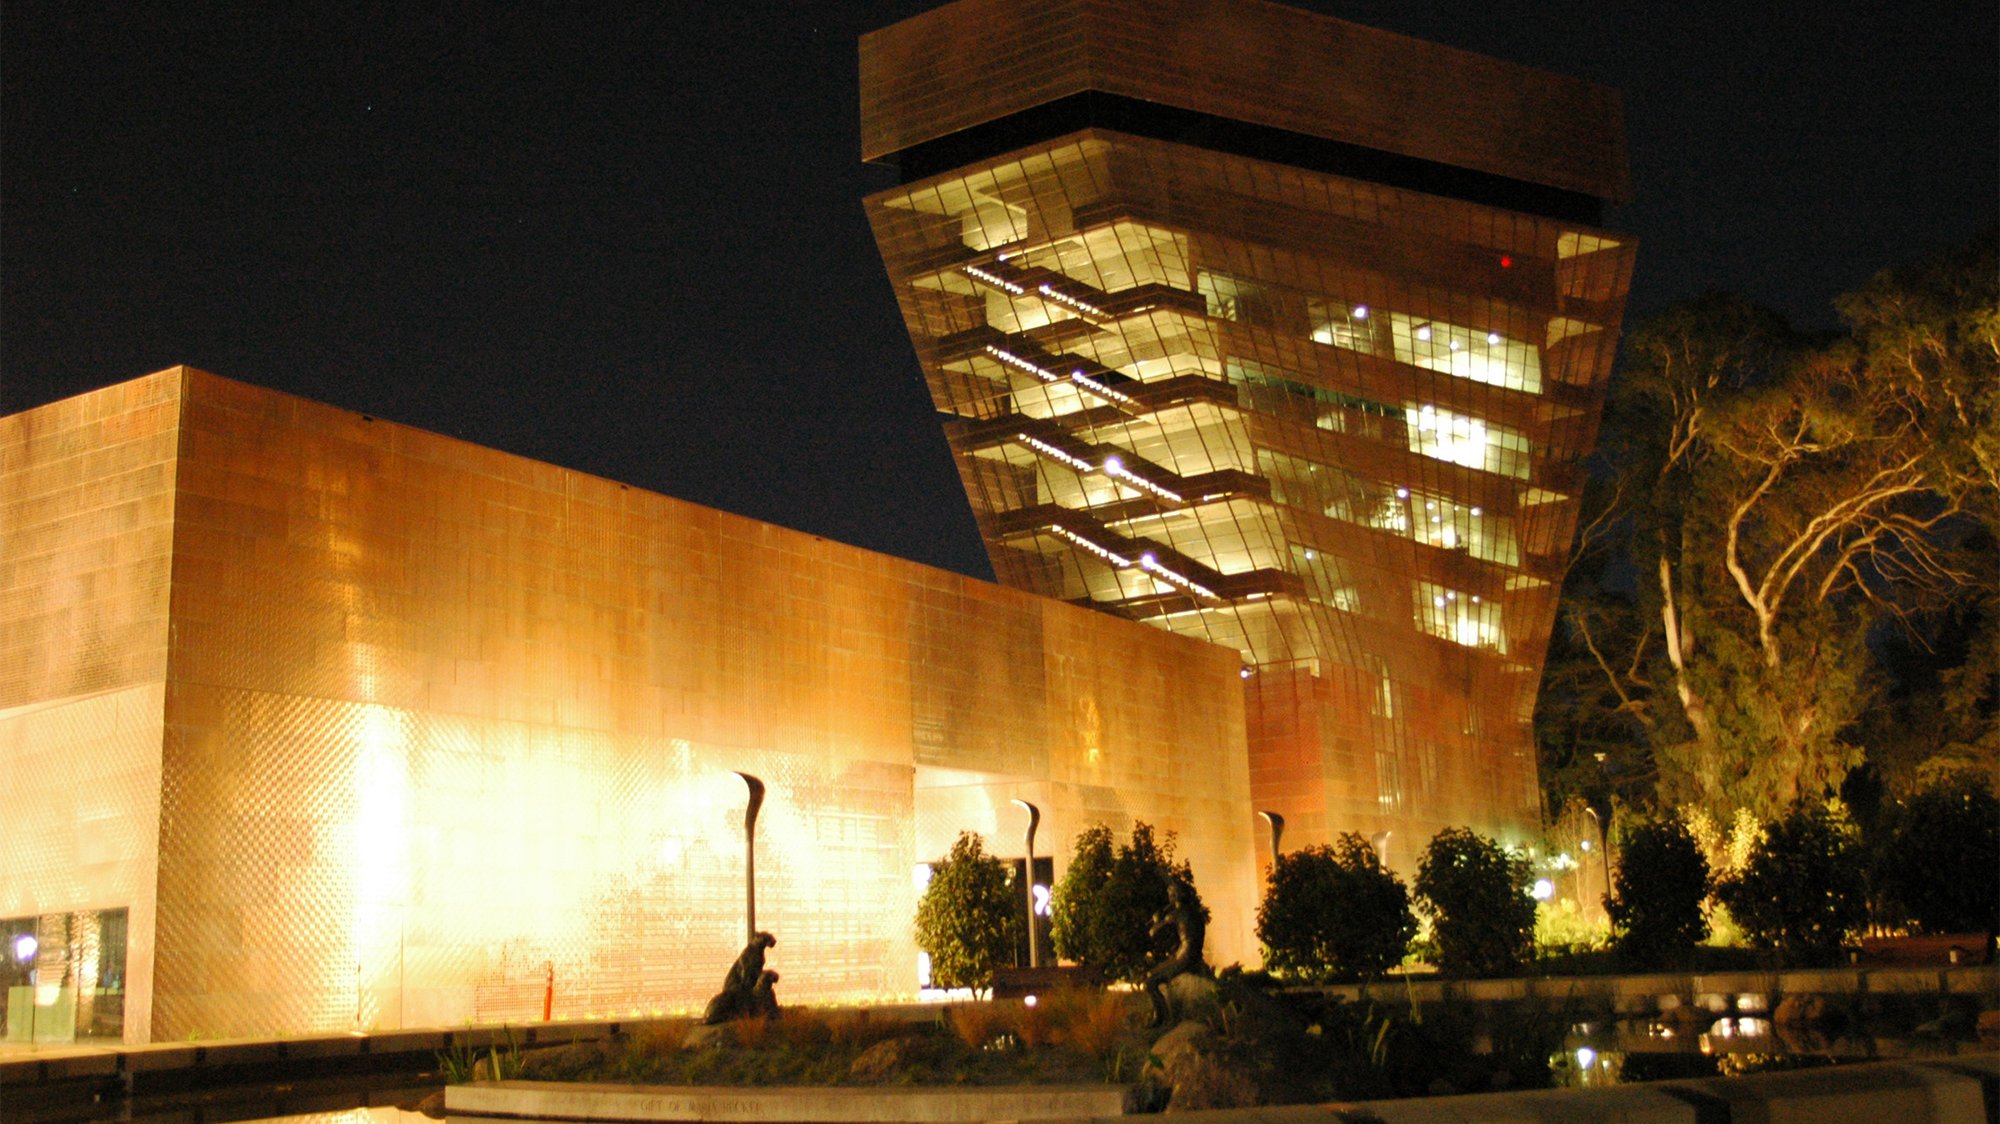 The New De Young Museum by night, Golden Gate Park. Photo: Heather M Reidy